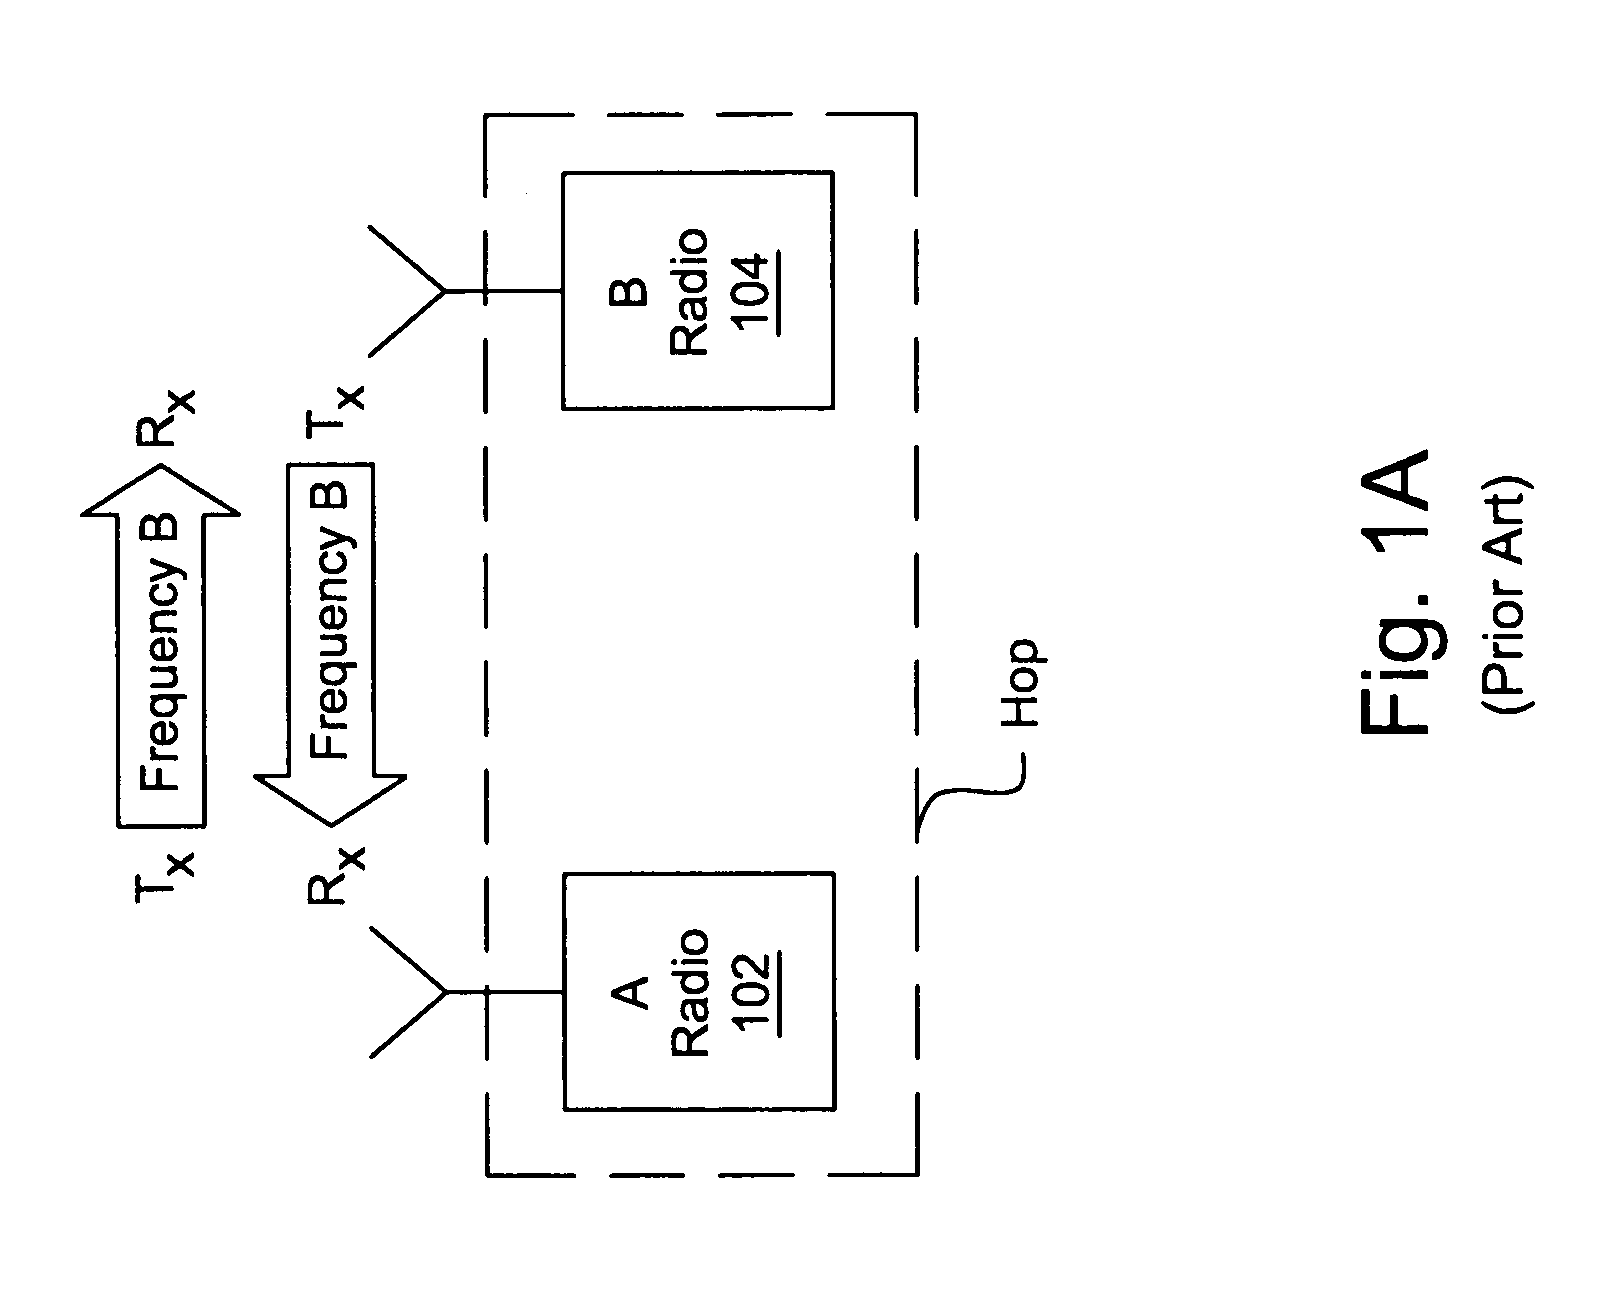 Electronically configurable transmit and receive paths for FDD wireless communication devices